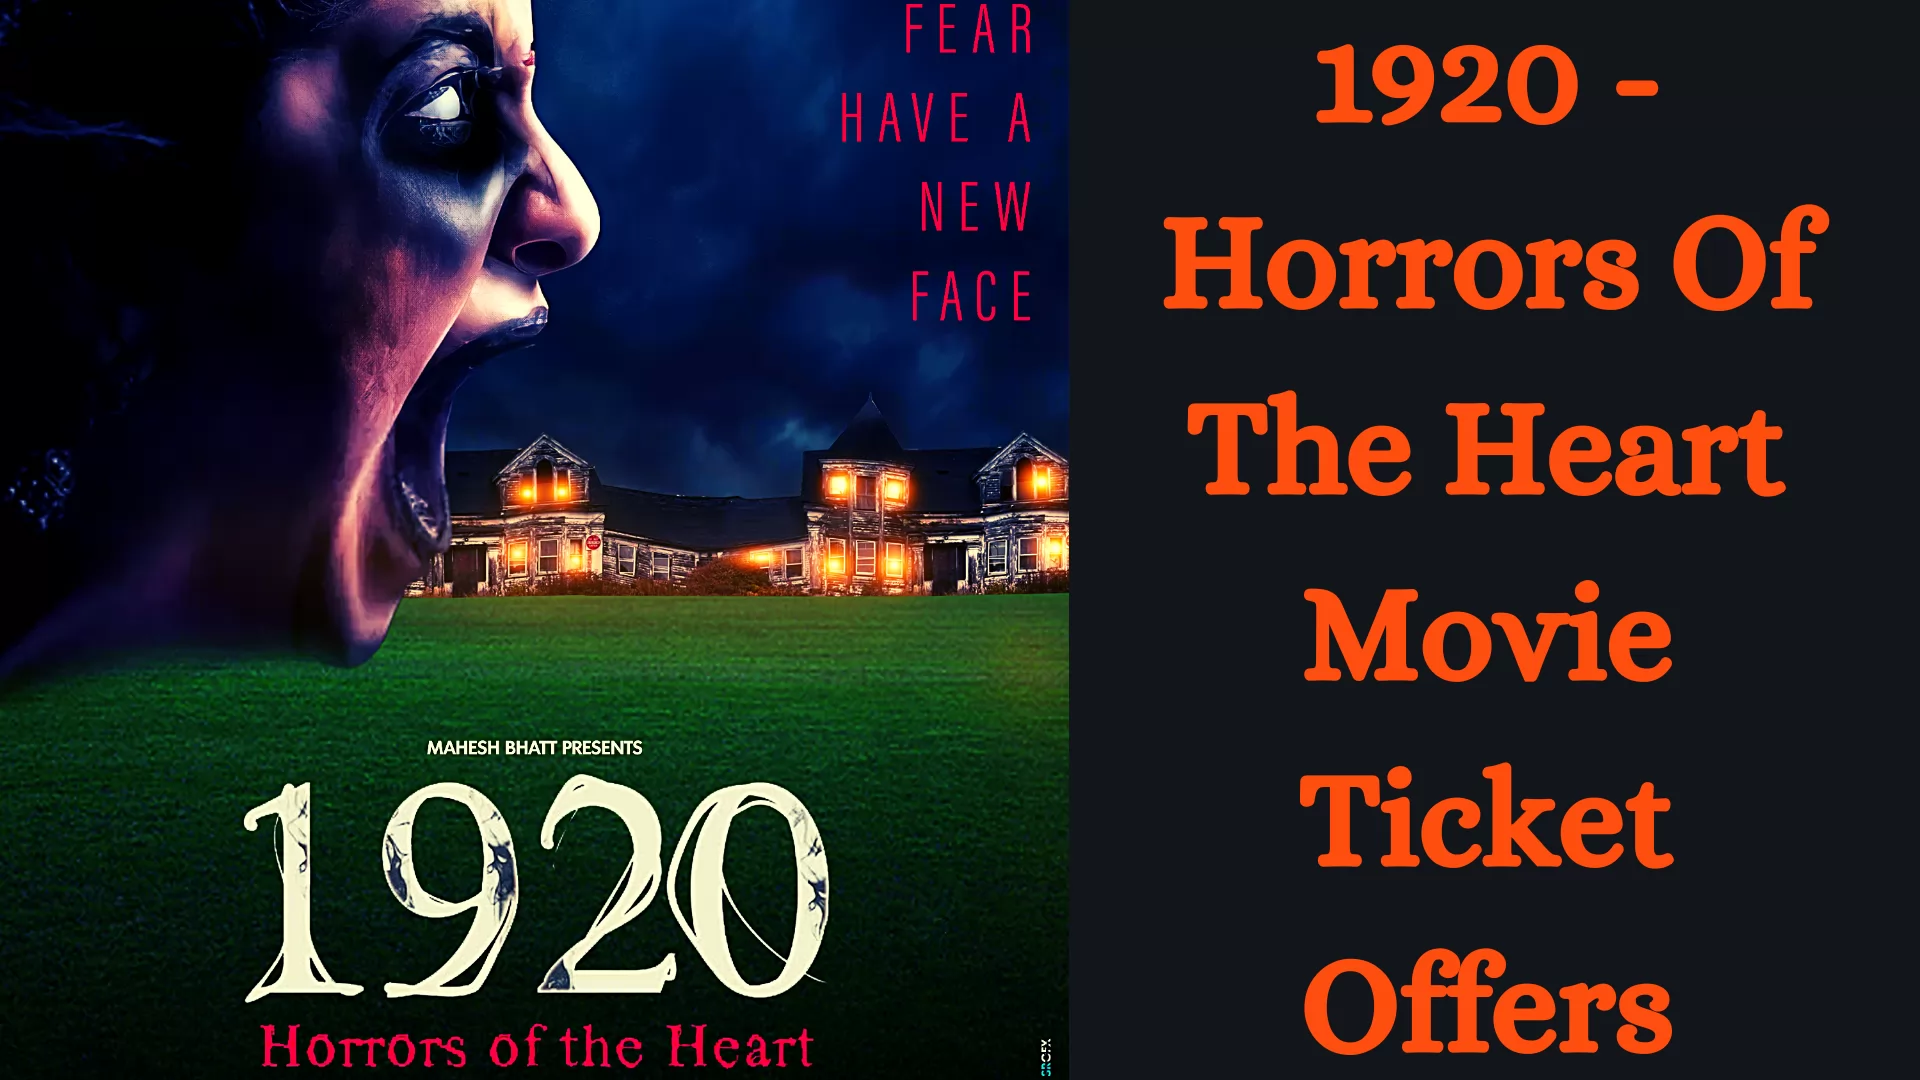 1920 - Horrors Of The Heart Movie Ticket Offers